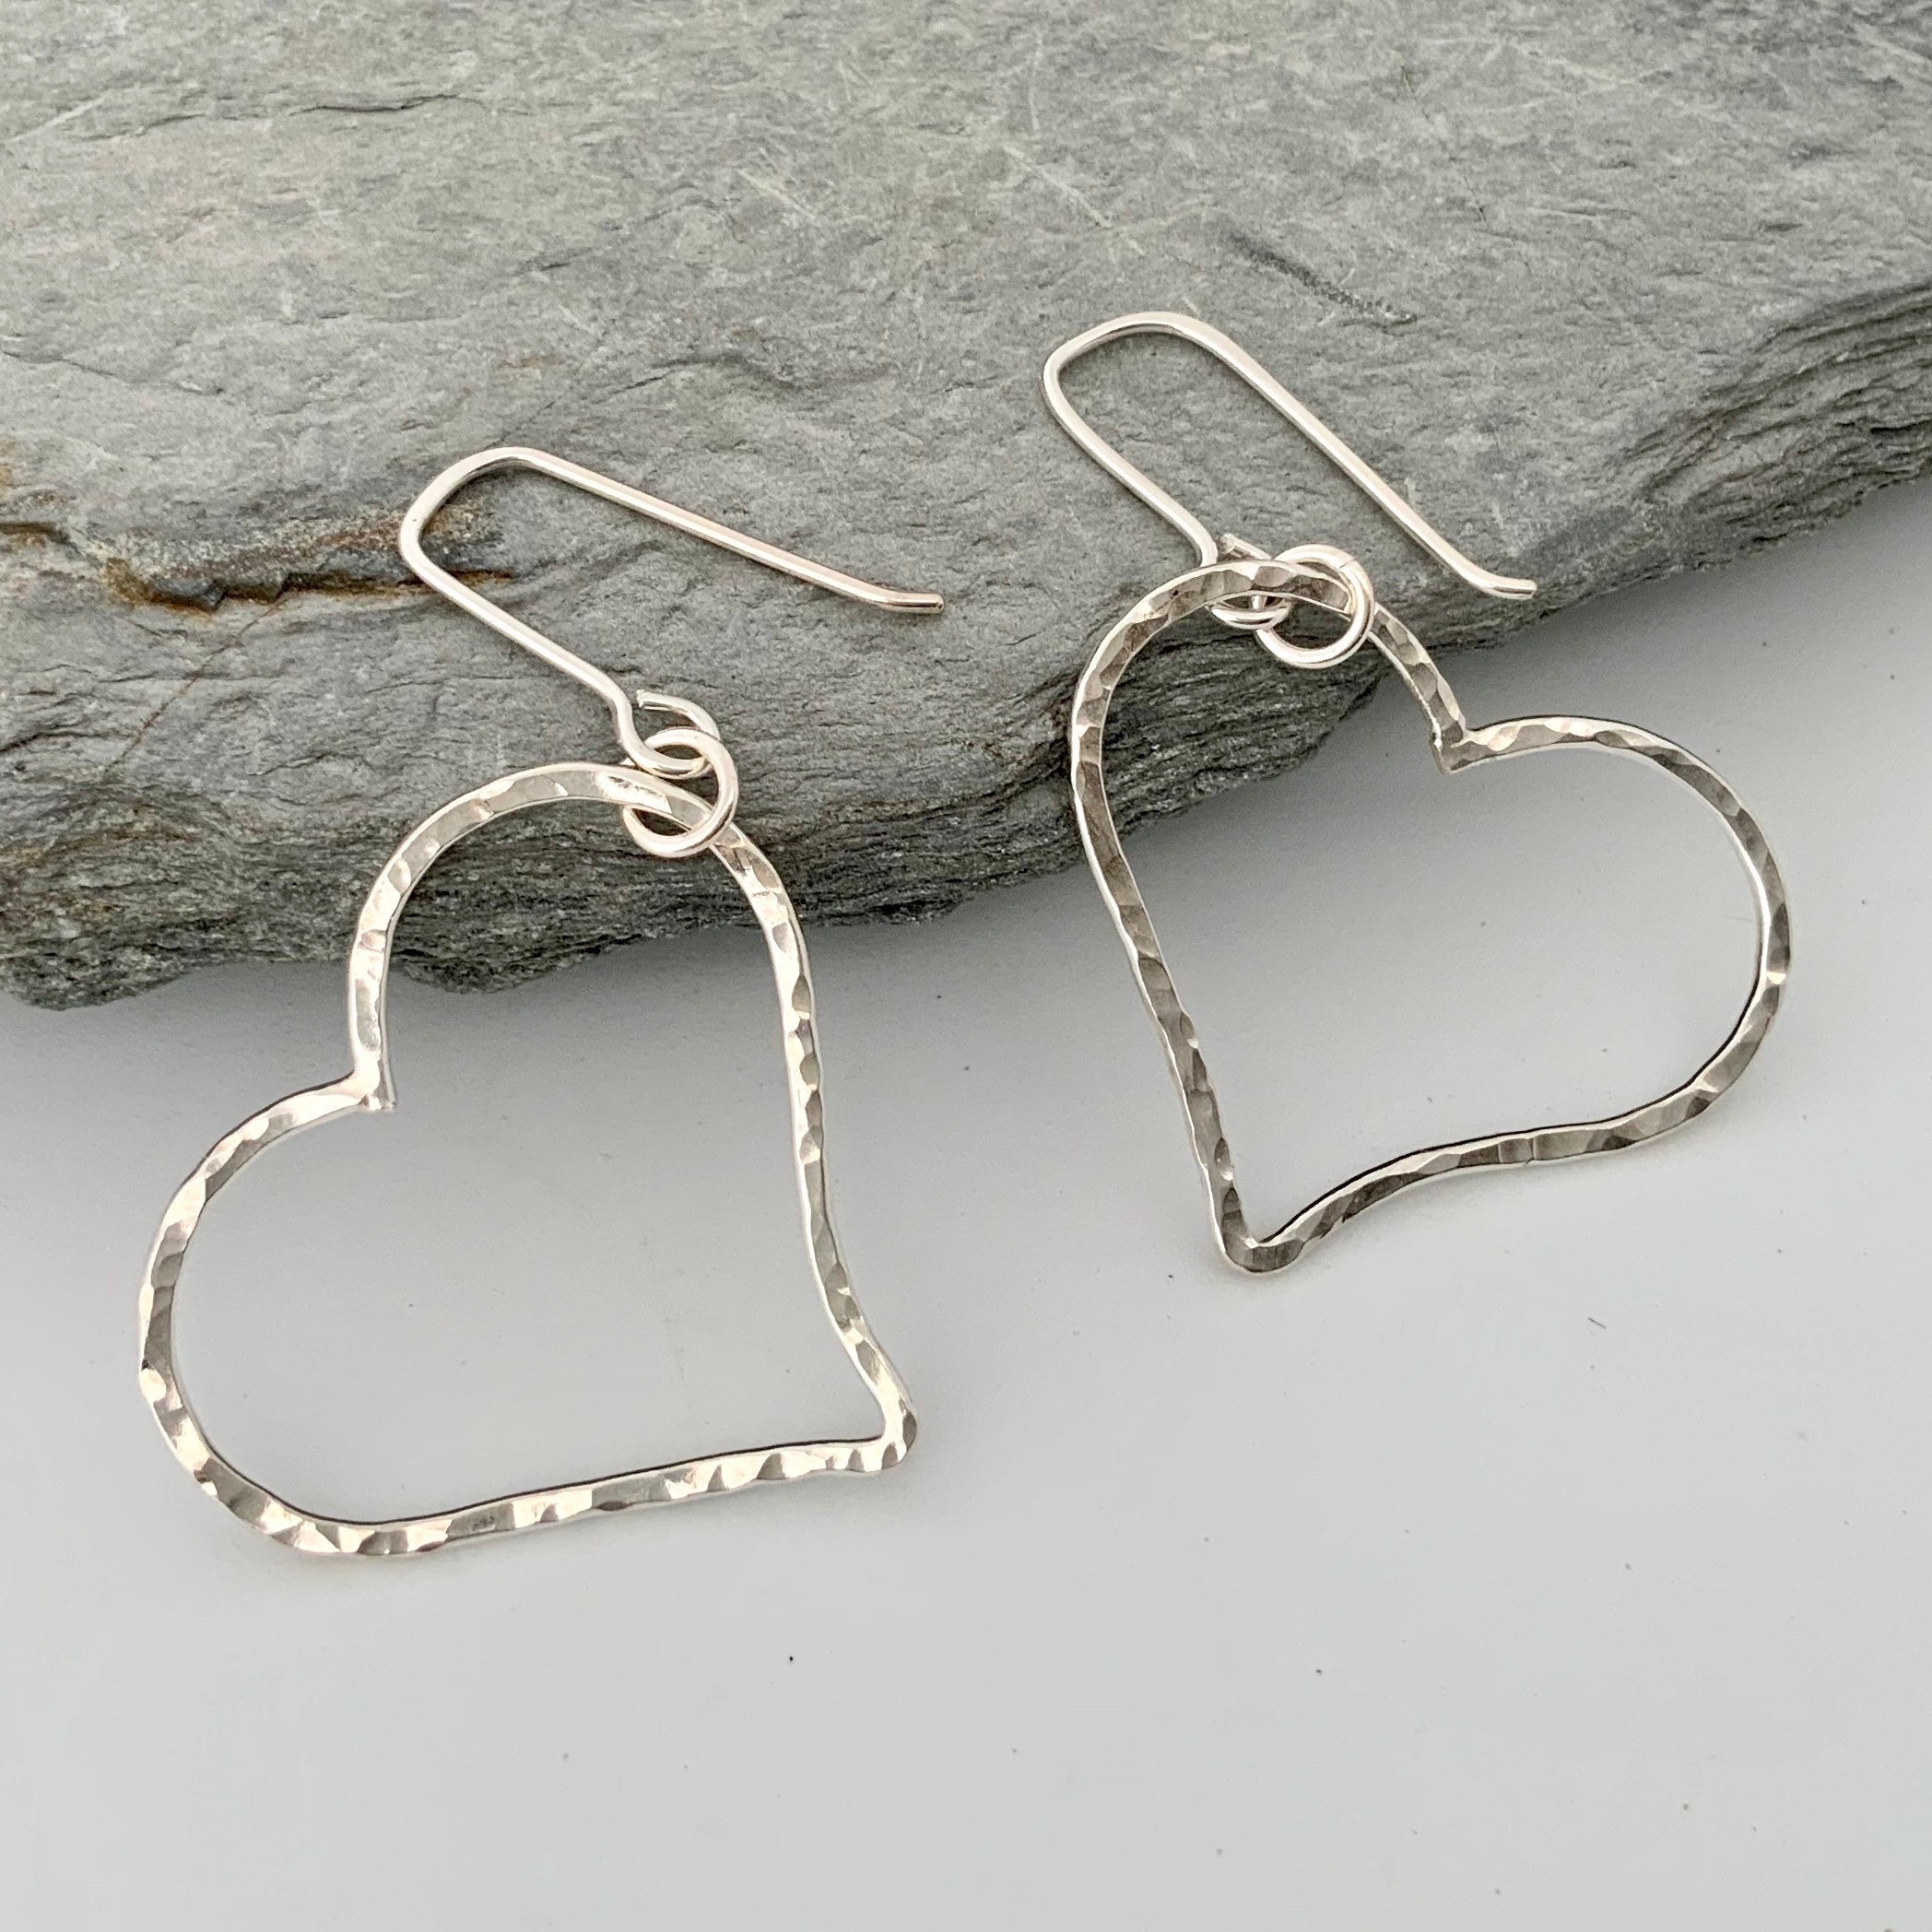 Heart Shaped Dangly Earrings Handmade From Hammered Silver